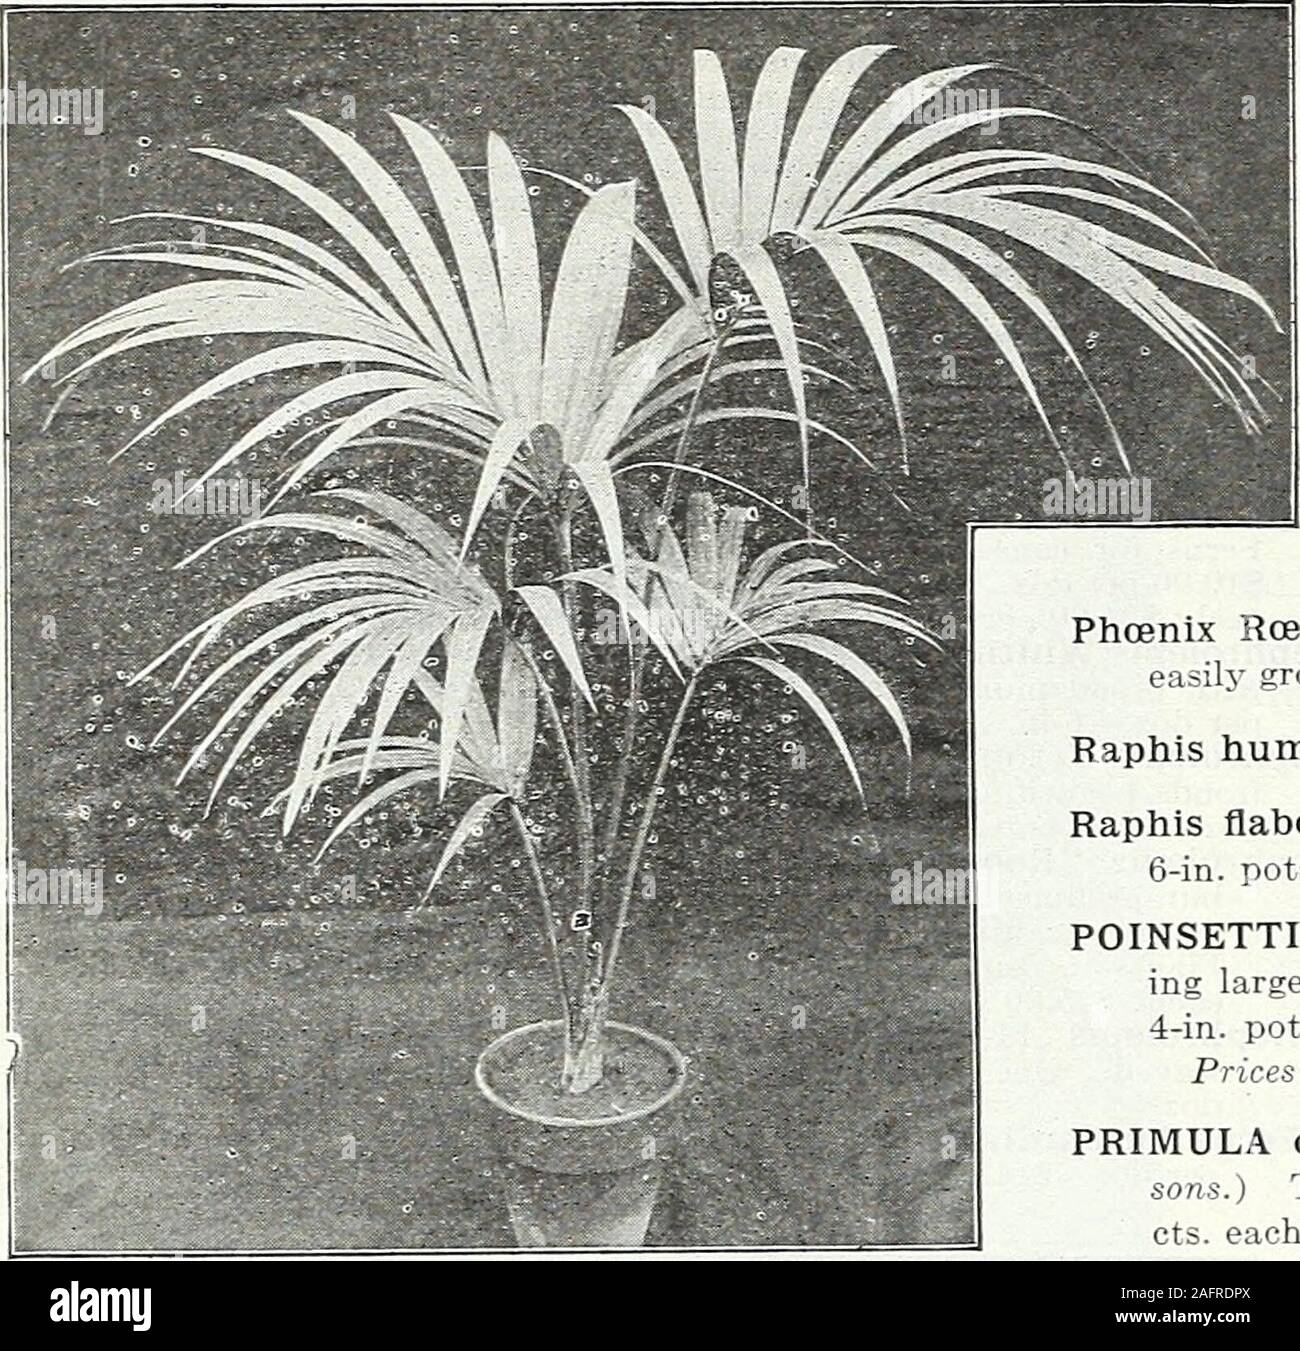 . Farquhar's autumn catalogue : 1921. Asplenium nidus-avis. (Birds Nest Fern.) Erica Wilmoreana. canariensis. A desirable Spring-flowering plant, producing fragrant, bright golden-yellow flowers in great pro-fusion. Plants in 5-in. pots, $1.25 each; $12.00 per doz. ISOLEPIS. gracilis. A useful foliage plant for vases, baskets or the window garden. Strong plants, 50 cts. each; $5.00per doz. JASMINUM. officinalis. Lovely white flowers. $1.00 each; $10.00 per doz. primulinum. A magnificent species with large, bright yellow flowers, produced in great profusion, during theentire Winter. Plants in 5 Stock Photo